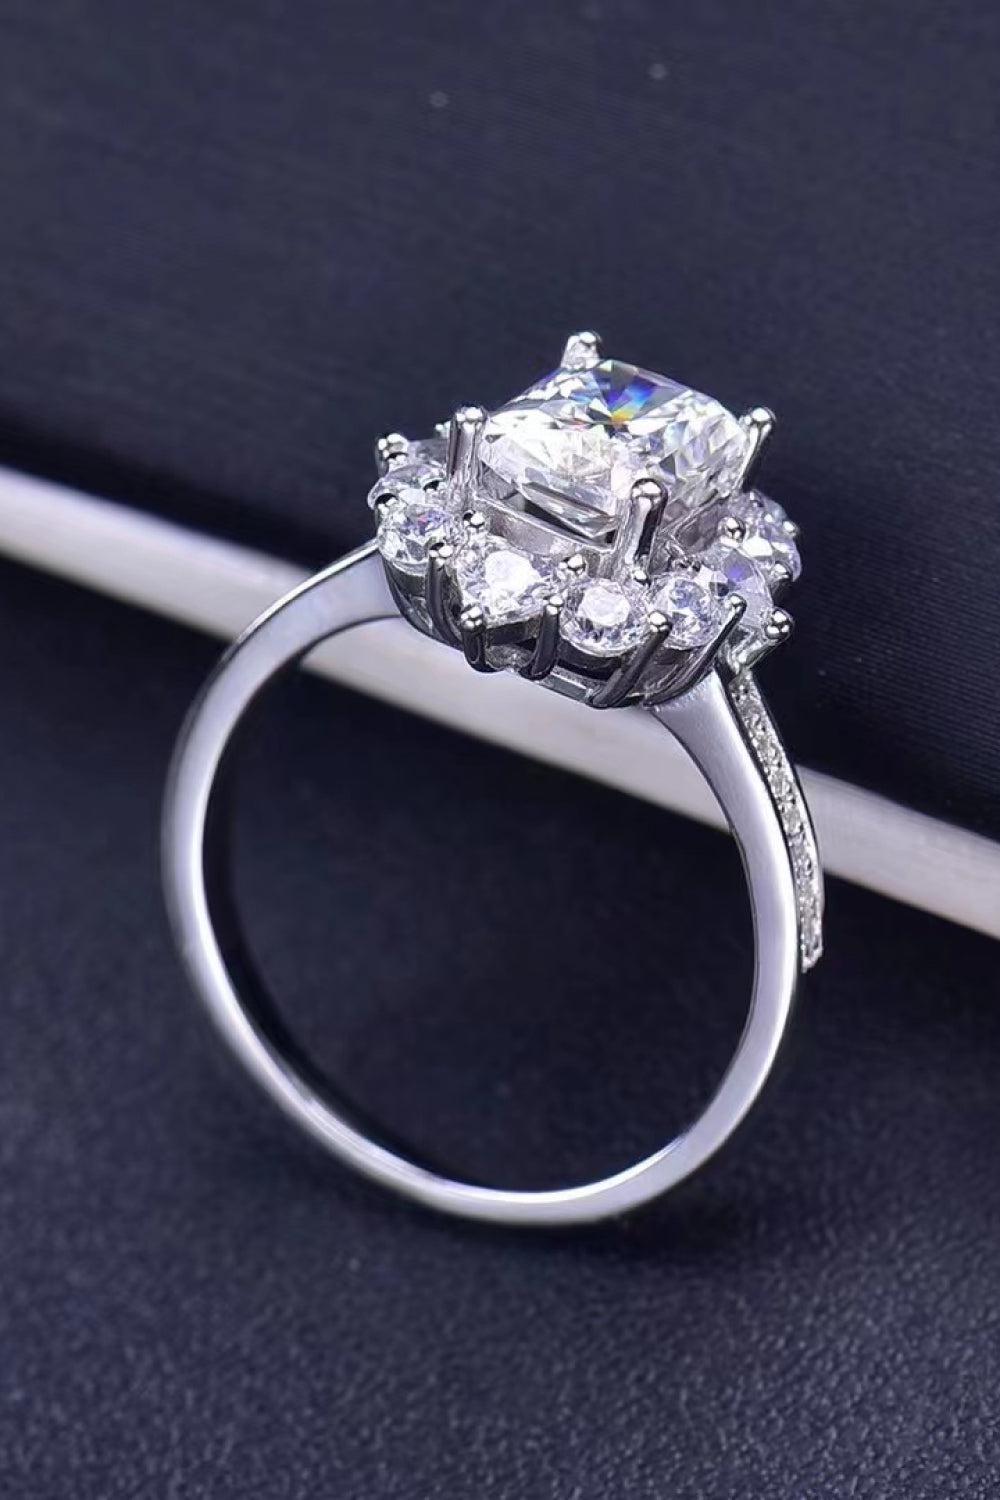 Need You Now 2 Carat Moissanite Ring BLUE ZONE PLANET